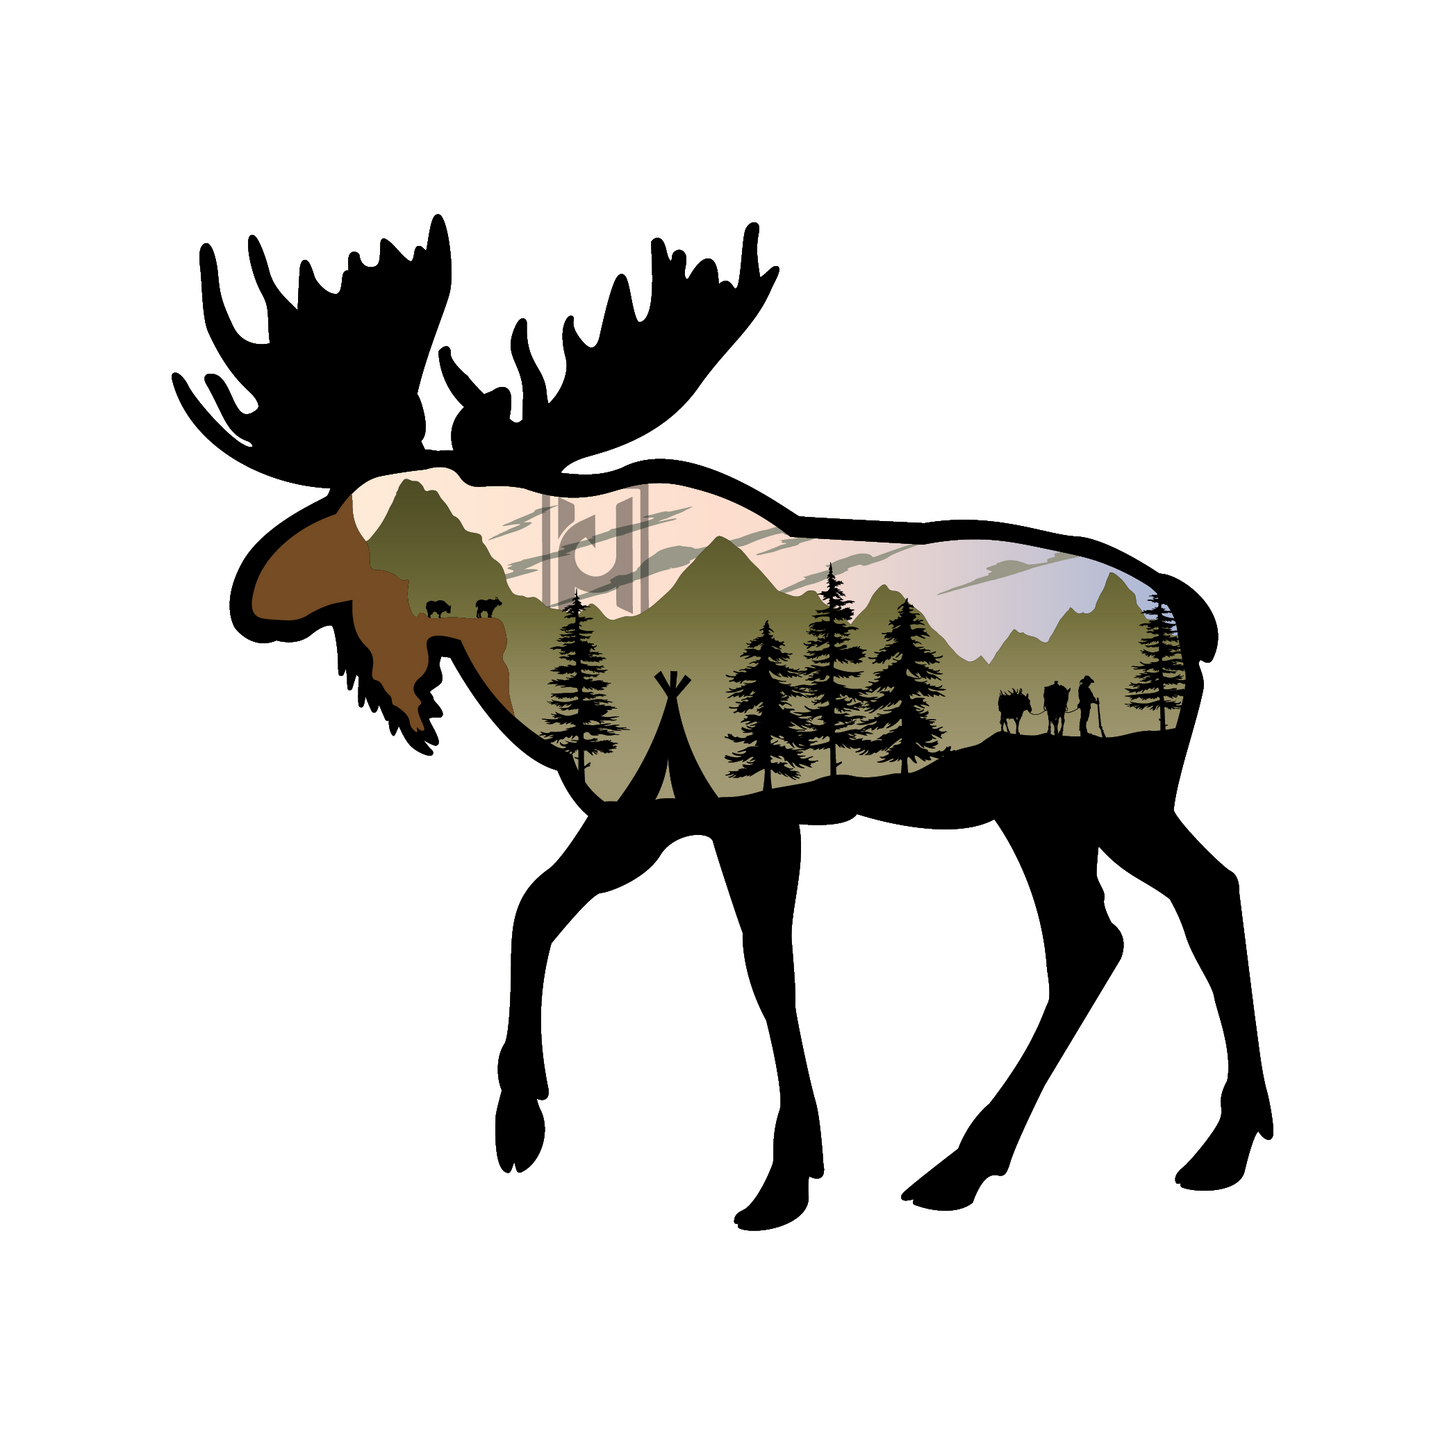 Moose sticker modeled after our wood art! Features a mountain camping scene.